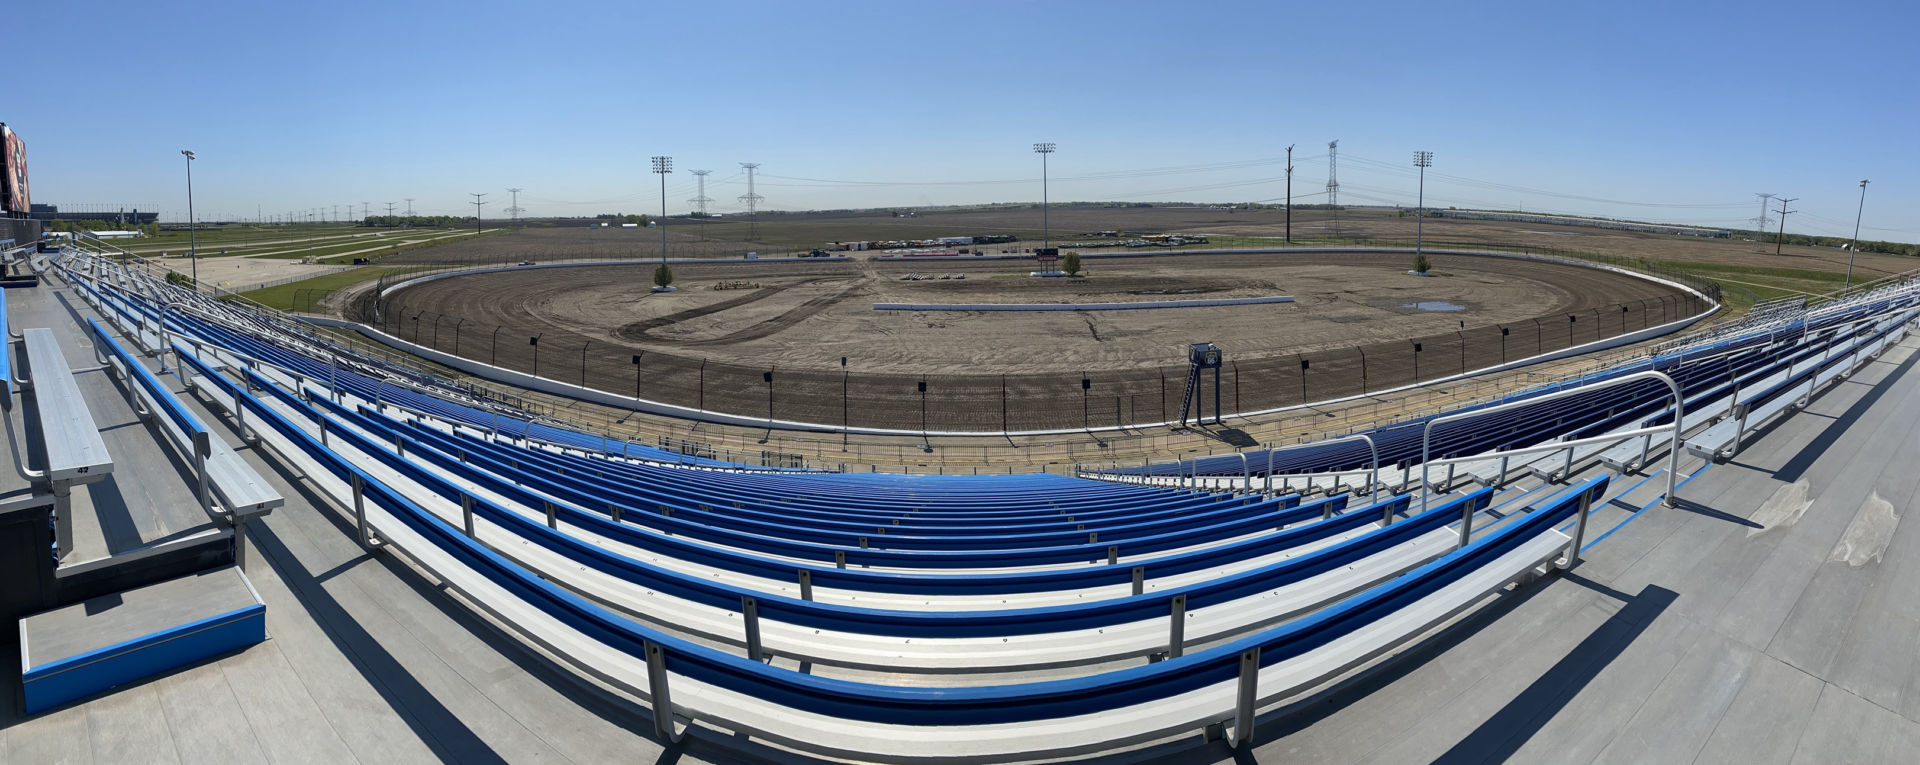 The Dirt Oval at Route 66 Raceway. Photo courtesy Route 66 Raceway.